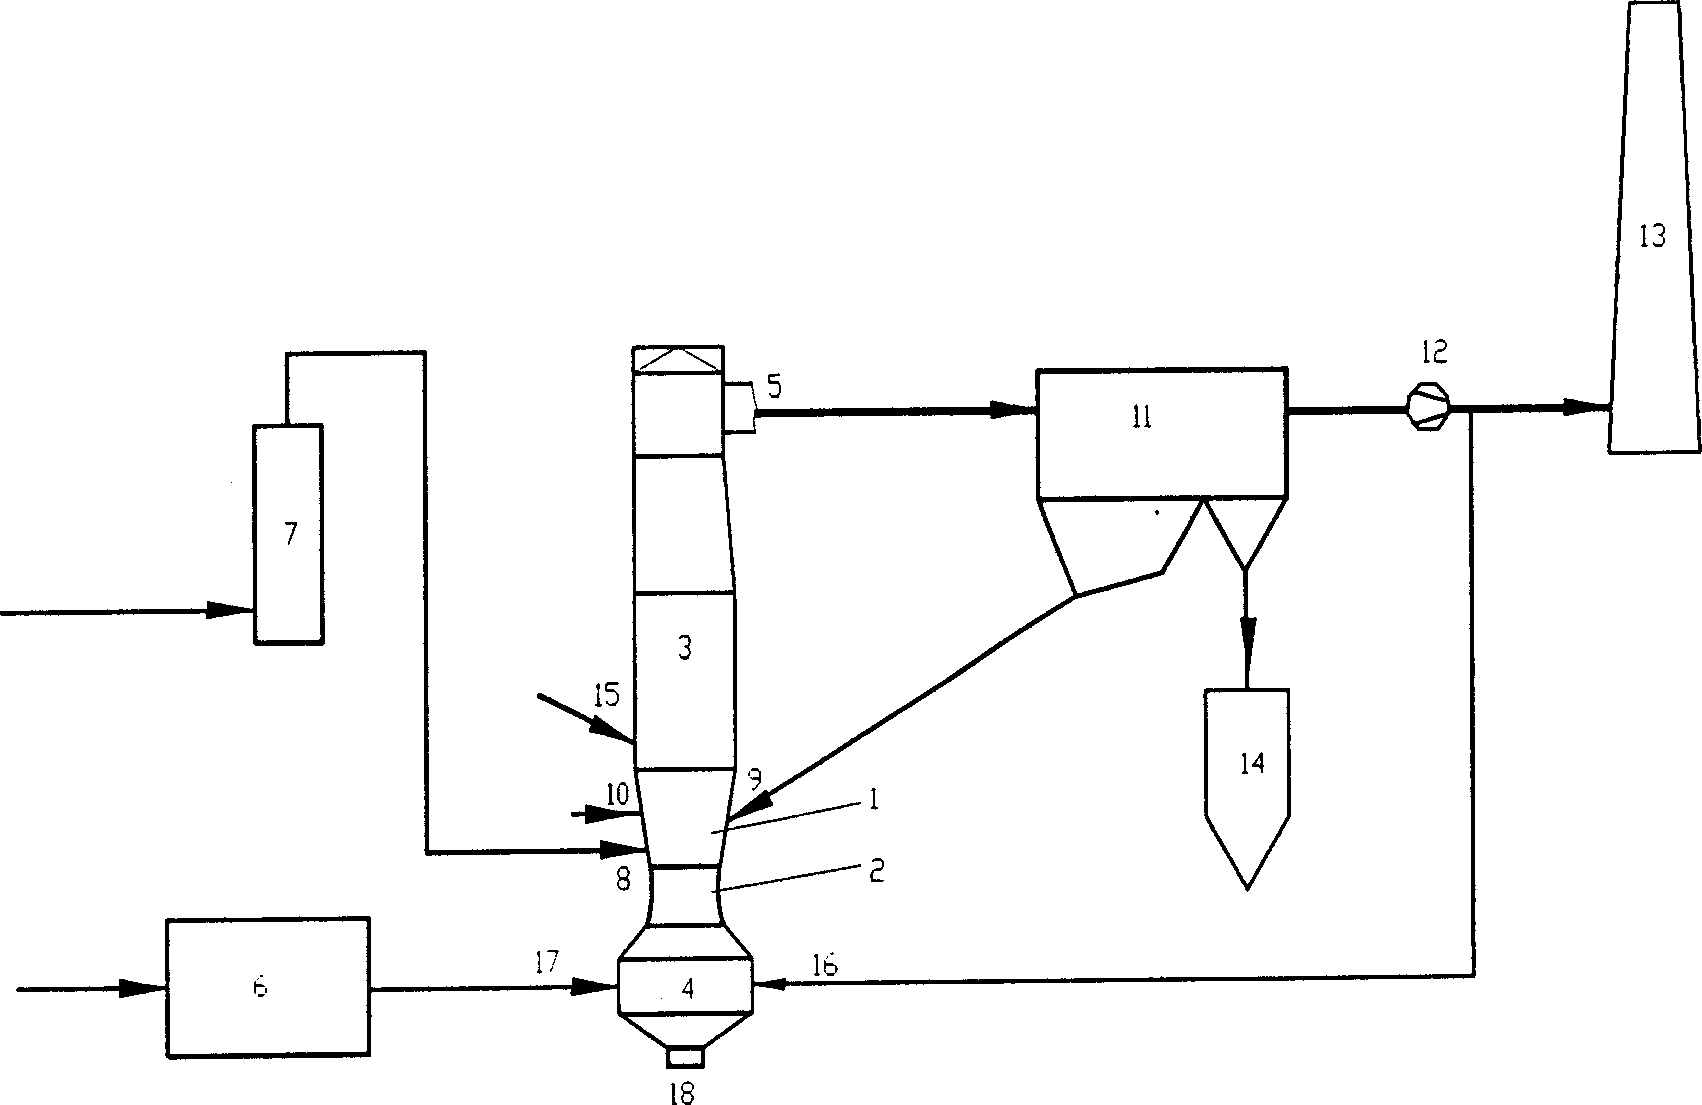 Dry-process flue gas desulfurizing method using combined gas jet